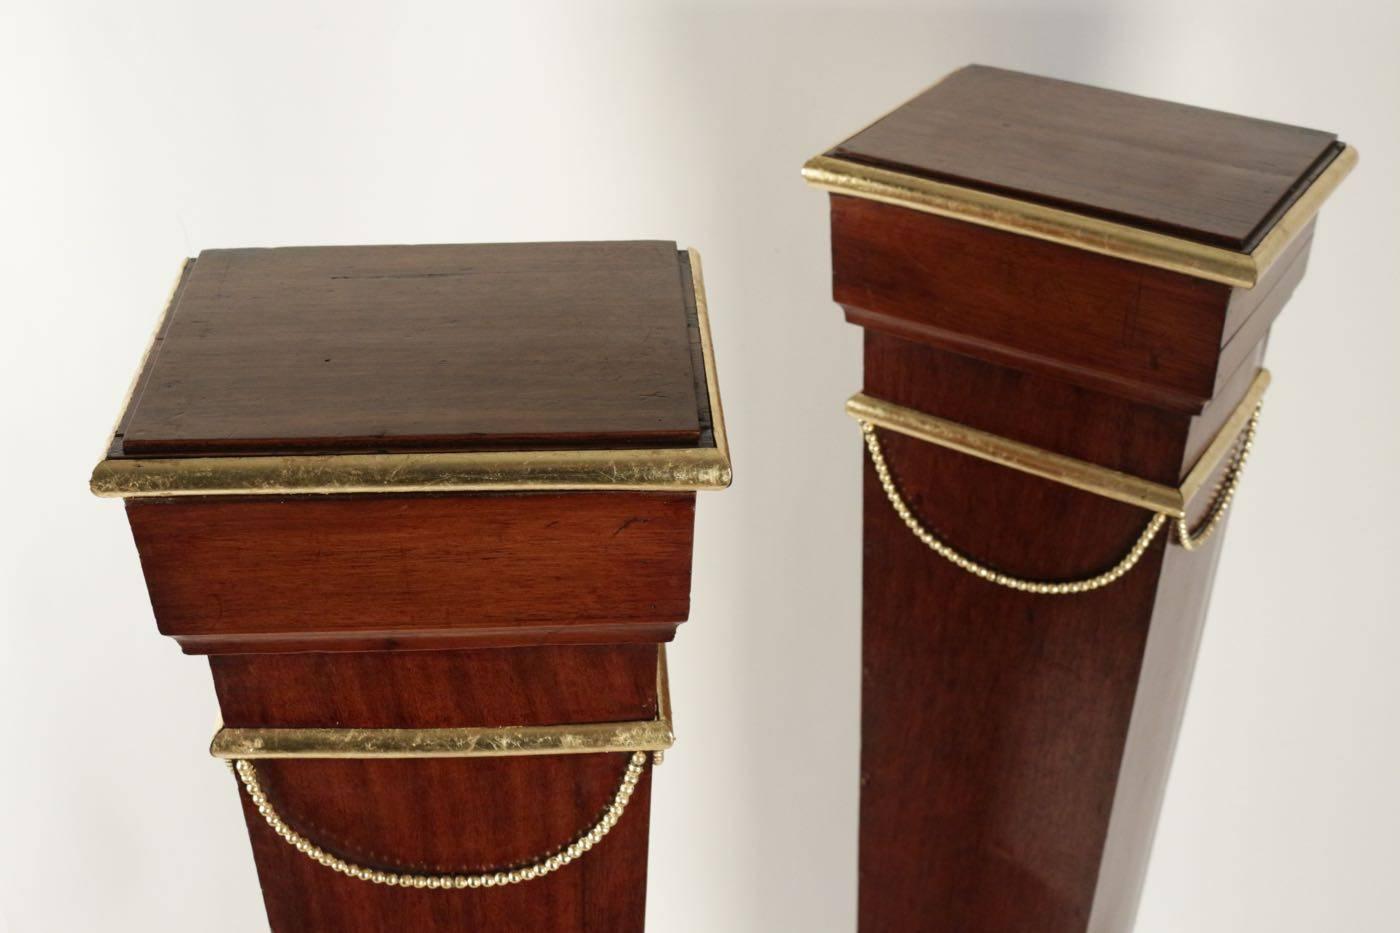 French Pair of Sheaths, Consoles, Mahogany, Golden at the Gold Leaf, 19th Century For Sale